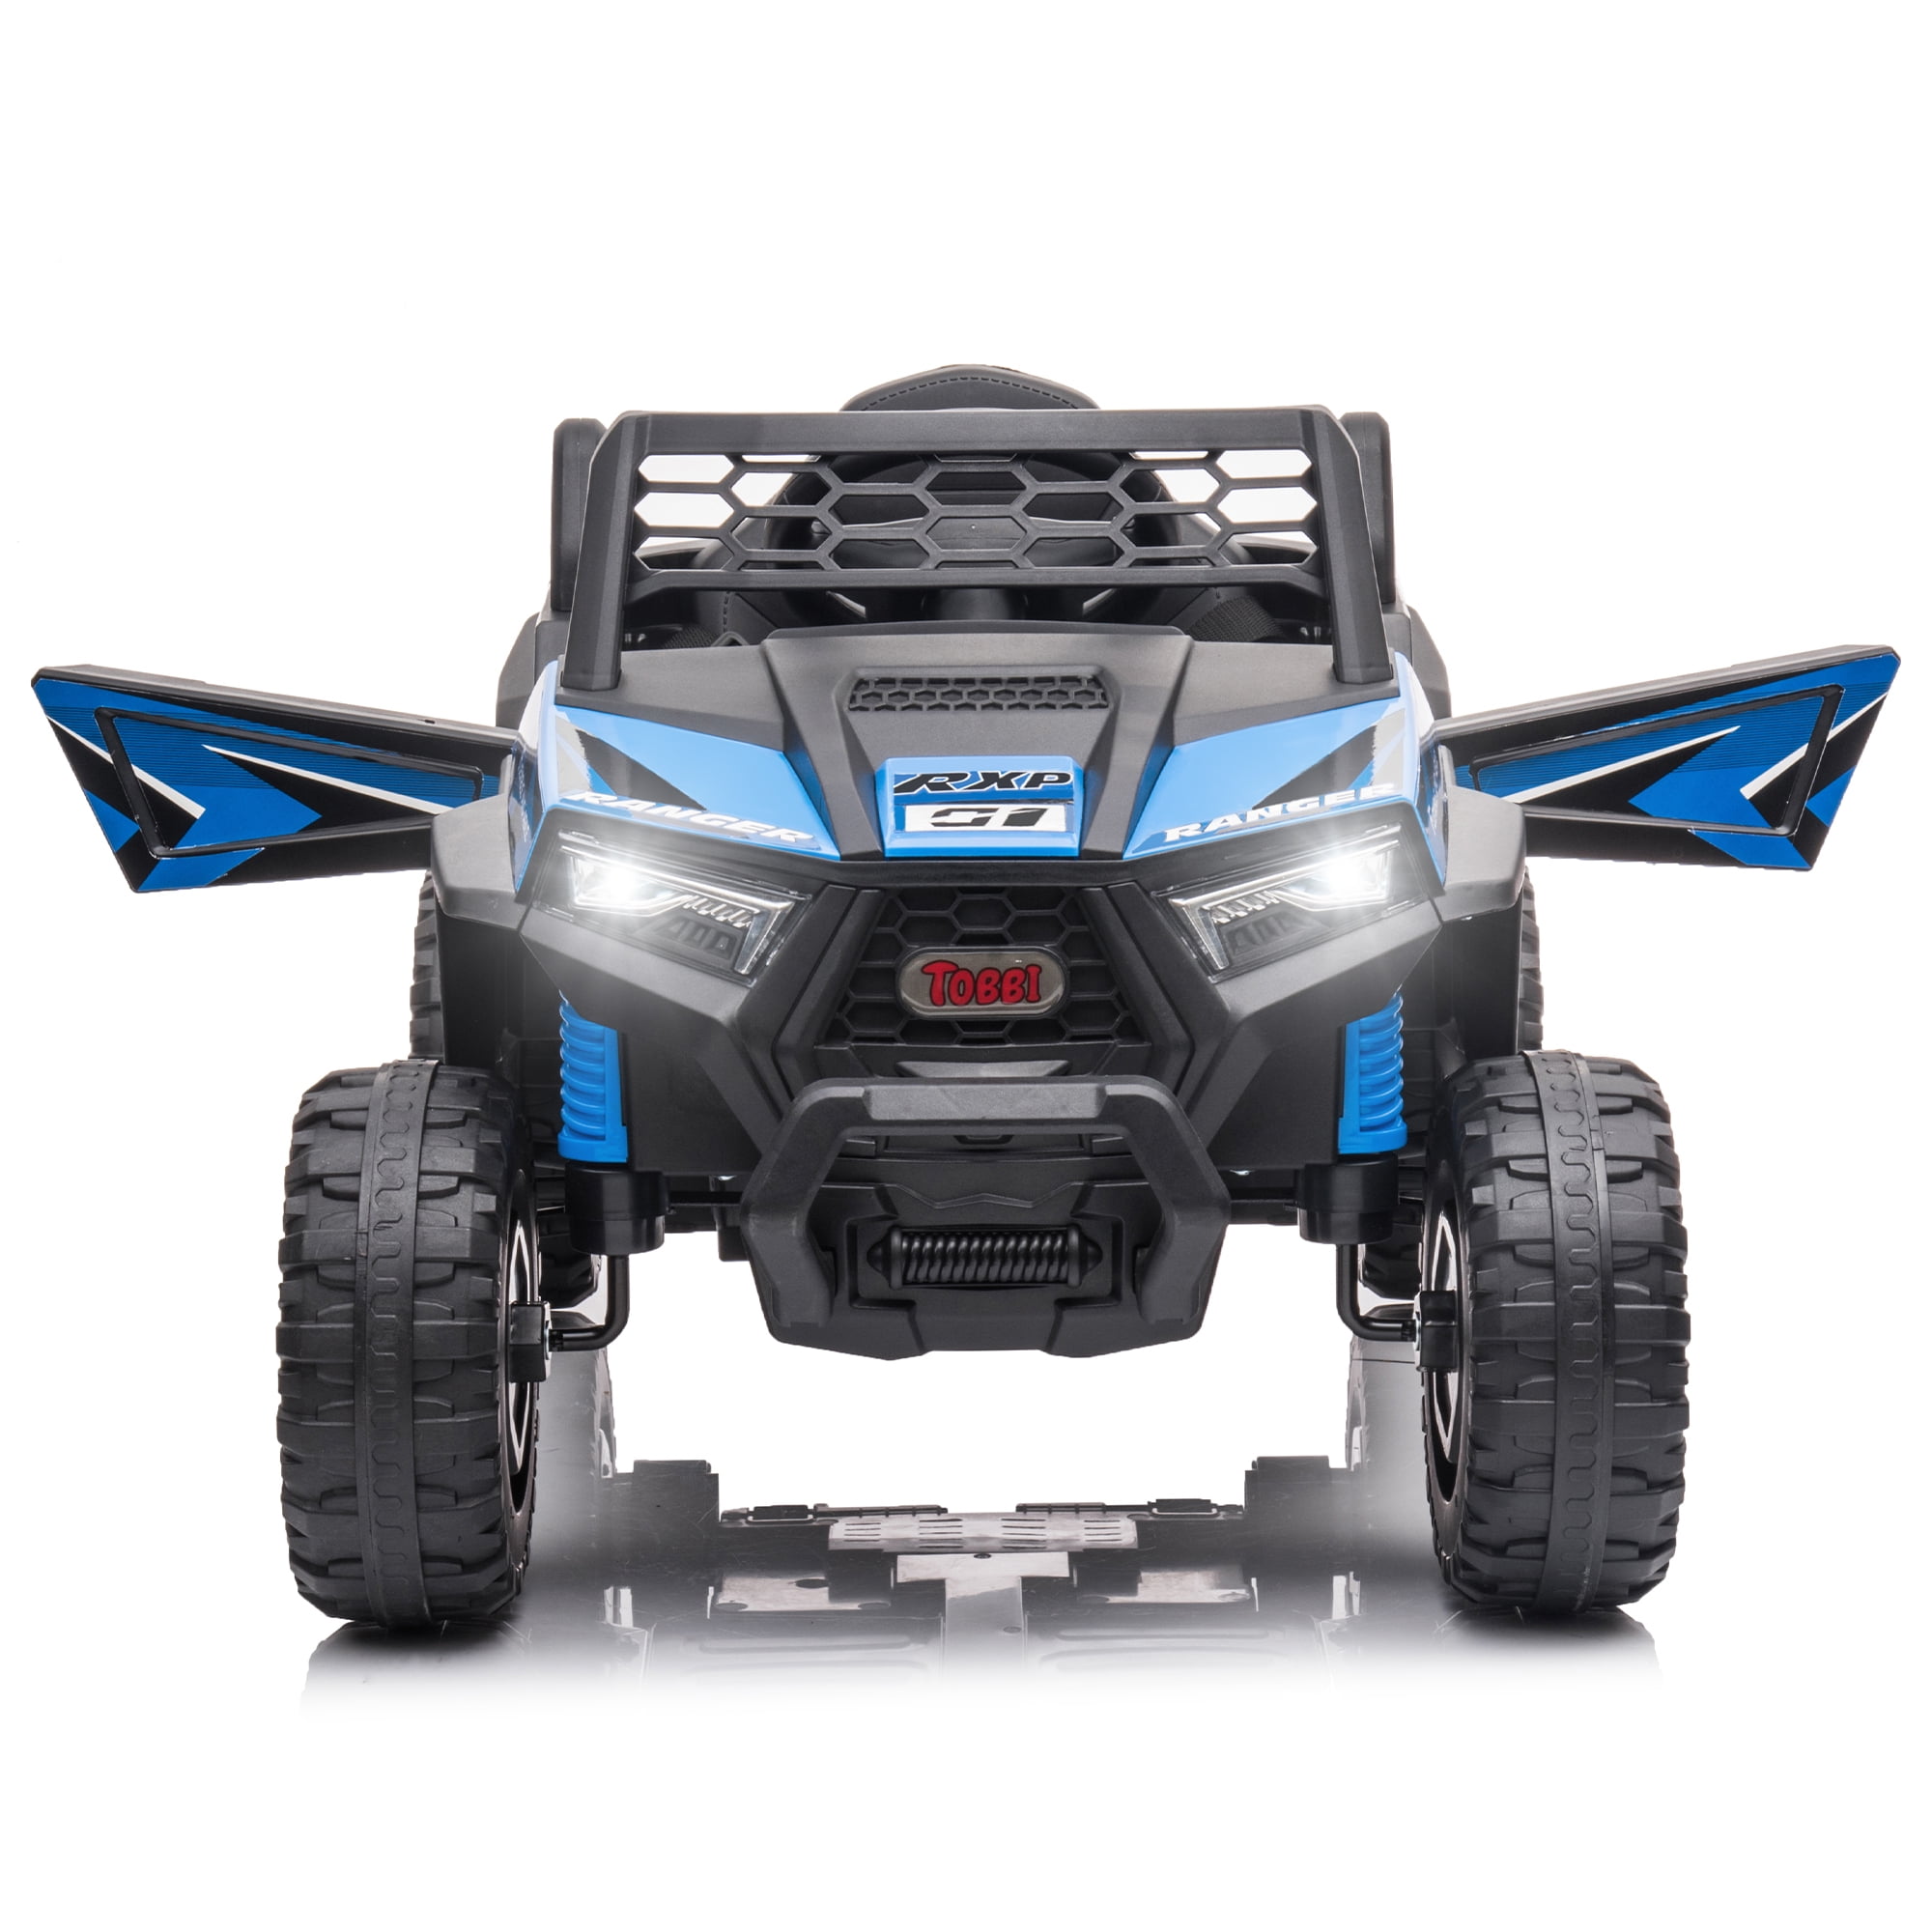 TOBBI 12V off-Road Electric Battery Powered Kids Ride on UTV Truck Toy with LED Headlights, Music, Horn, Blue and Black